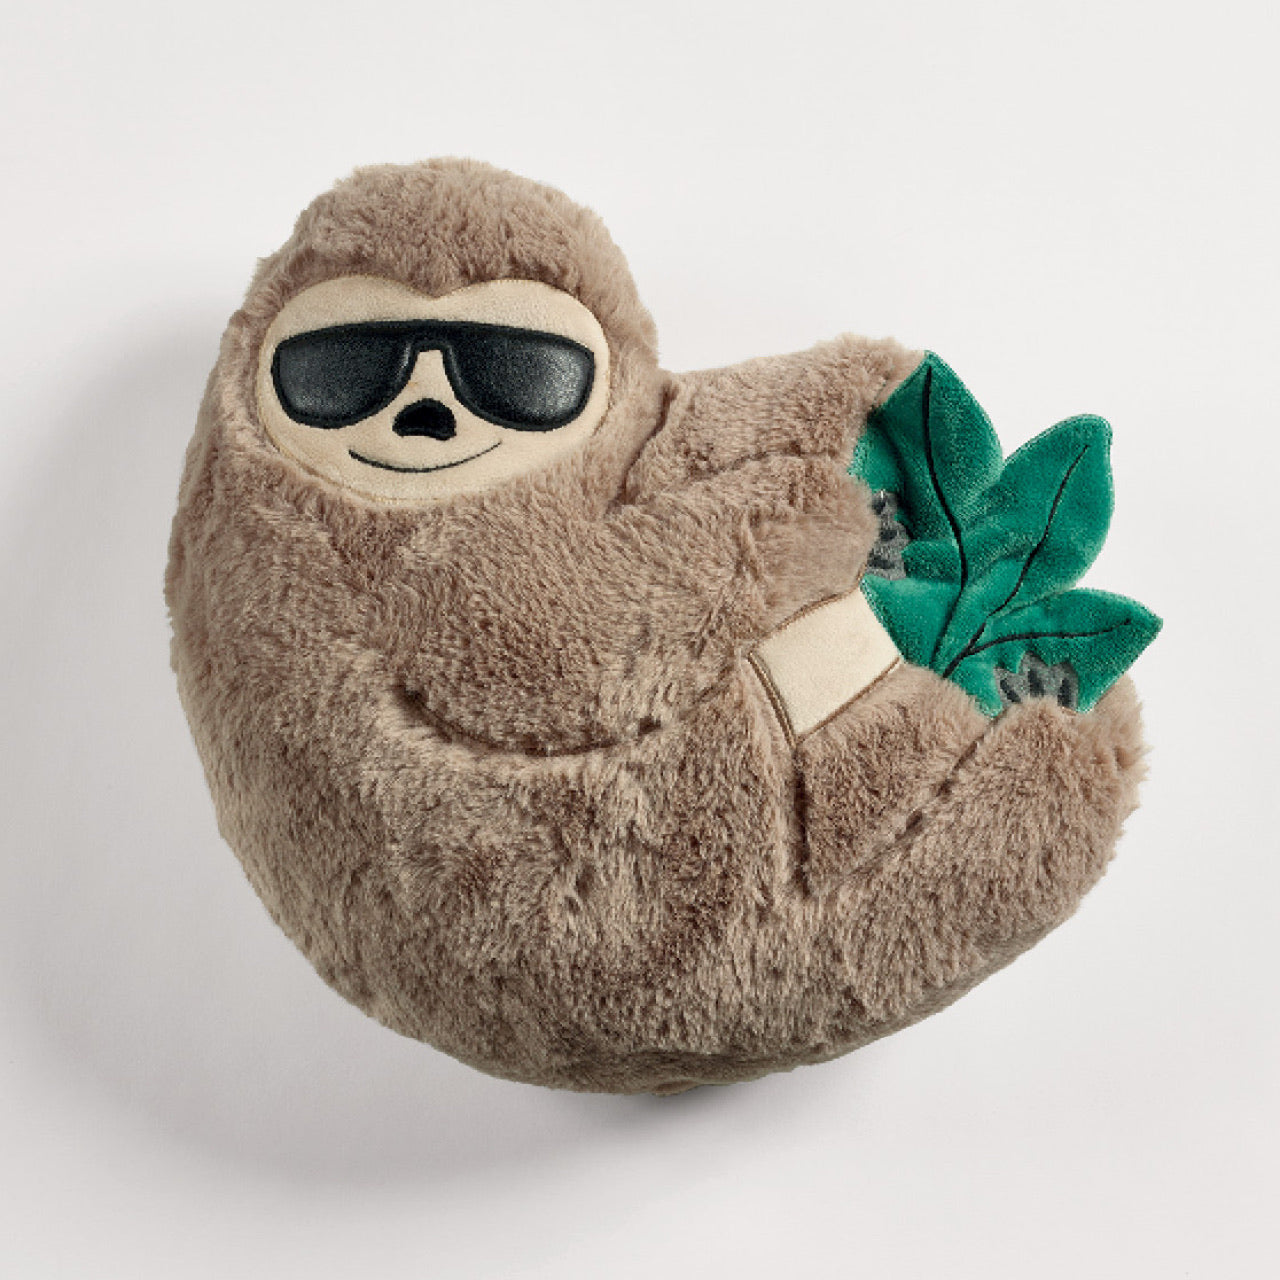 Sloth Soft Toy on a white background